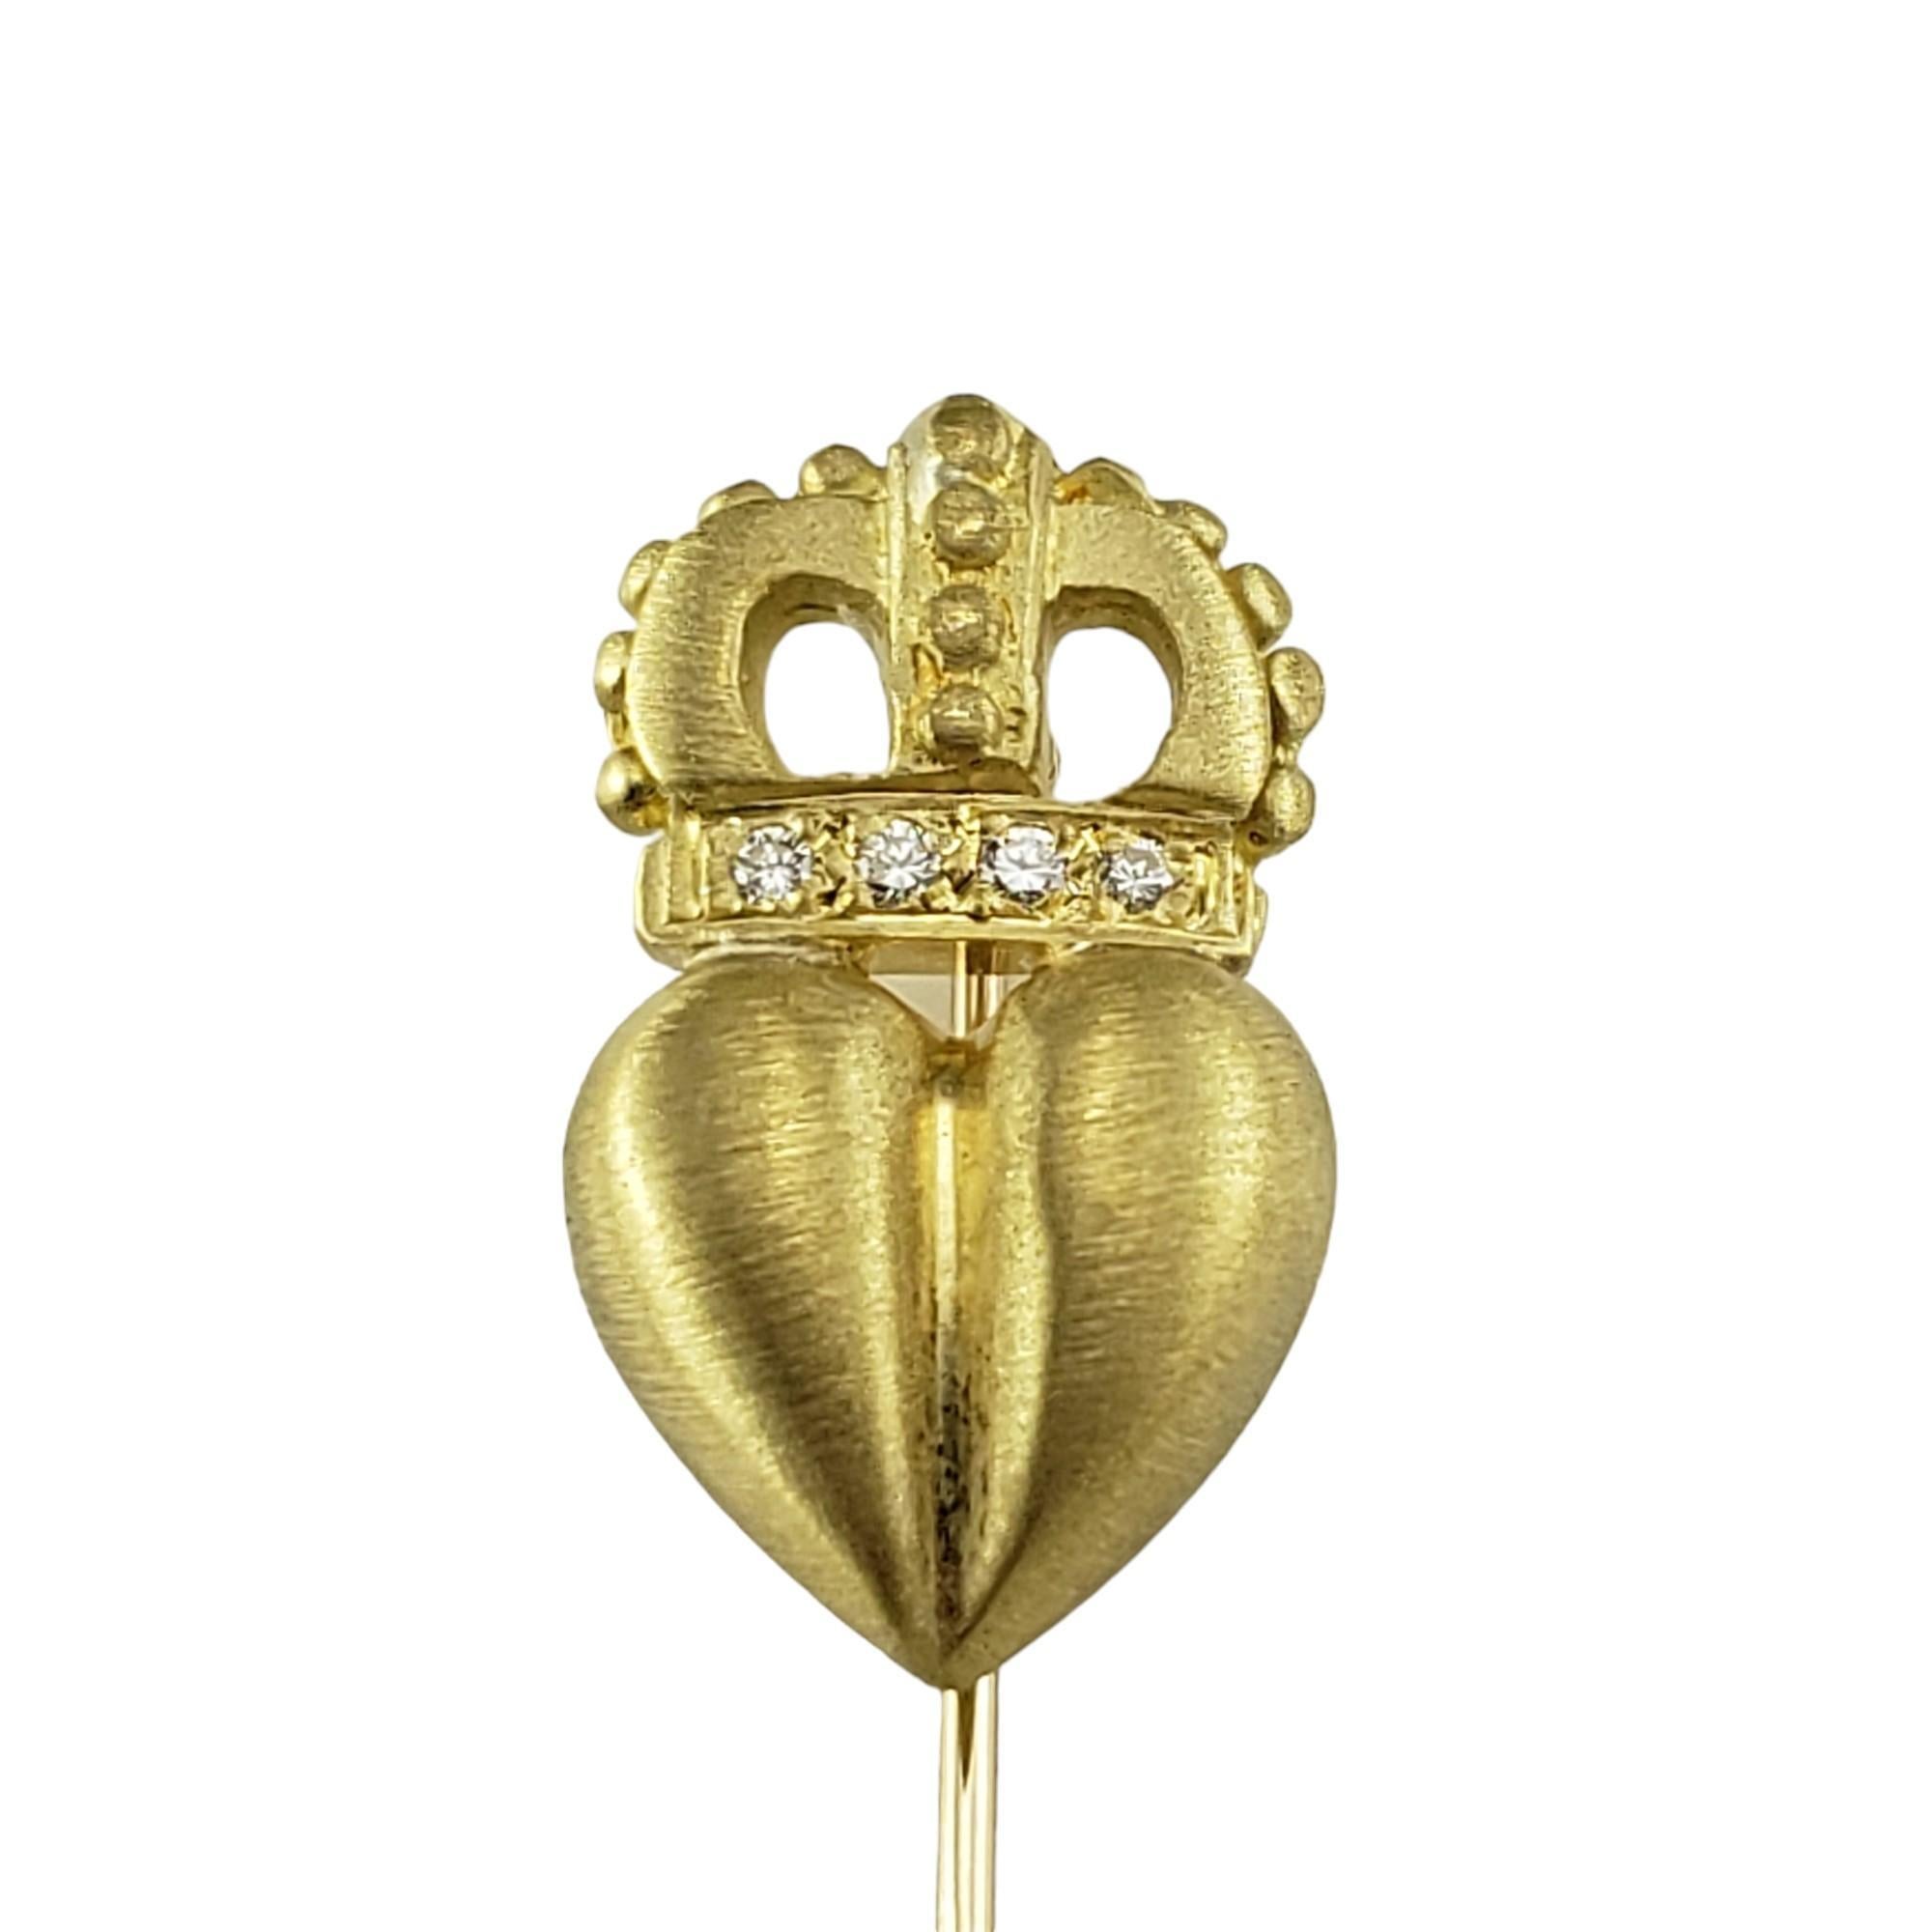 Penny Preville 18 Karat Yellow Gold and Diamond Stick Pin-

This elegant Claddagh stick pin by Penny Preville features four round brilliant cut diamonds set in classic 18K yellow gold.

Approximate total diamond weight: .03 ct.

Diamond color: